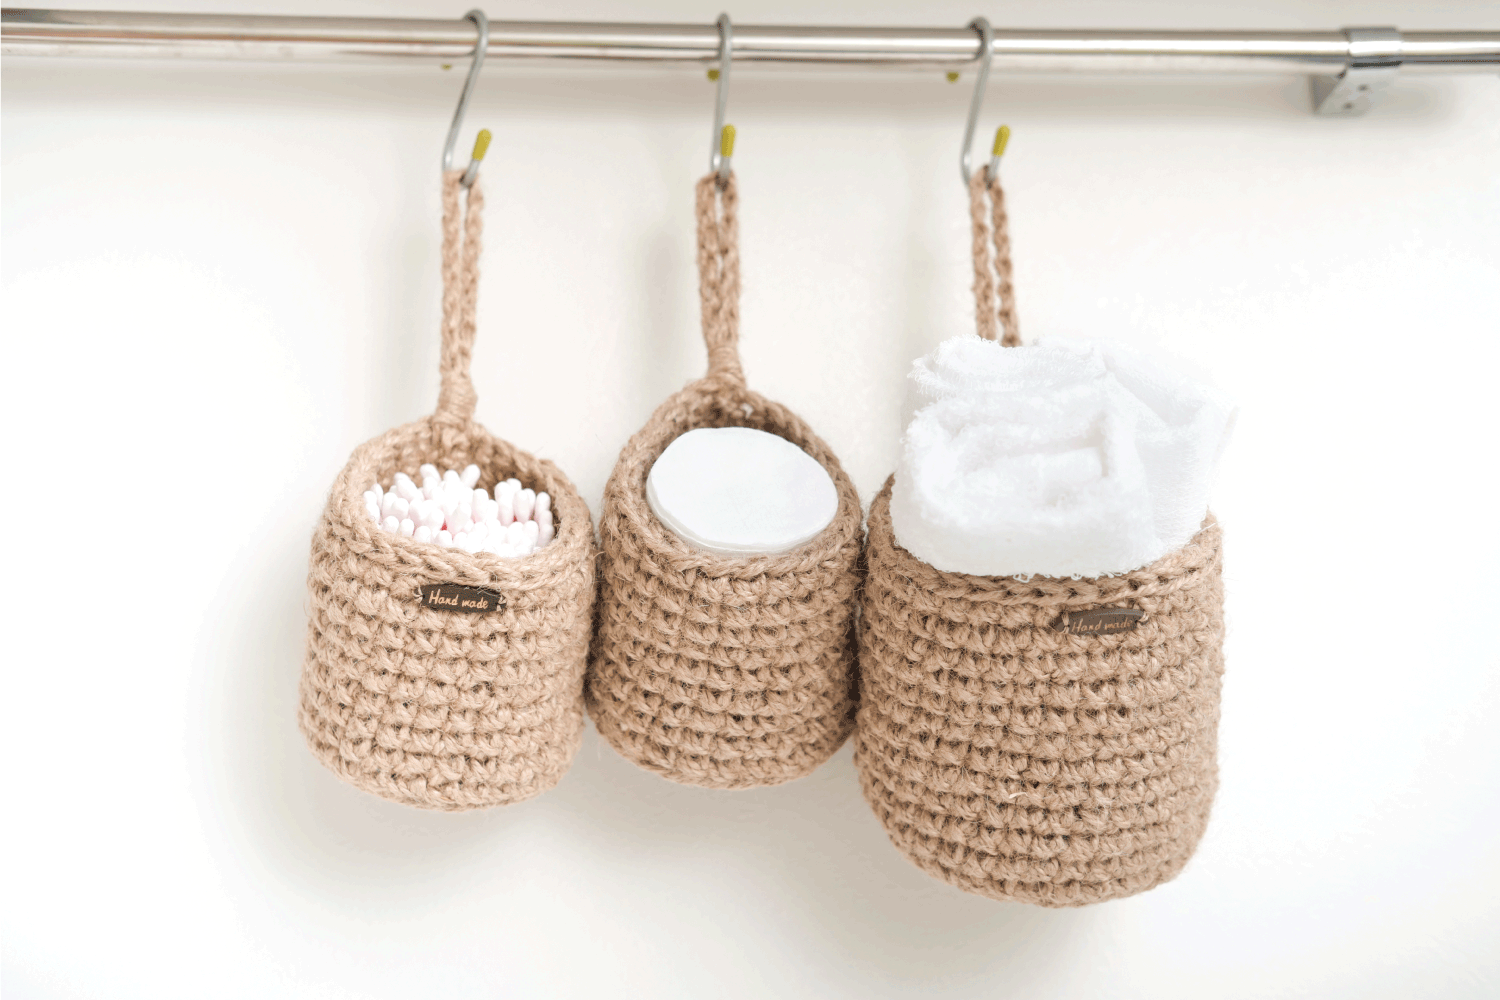 three wicker mini baskets hanging on a wall. toiletry storage in bathroom. eco natural jute hand made basket. cozy scandinavian style